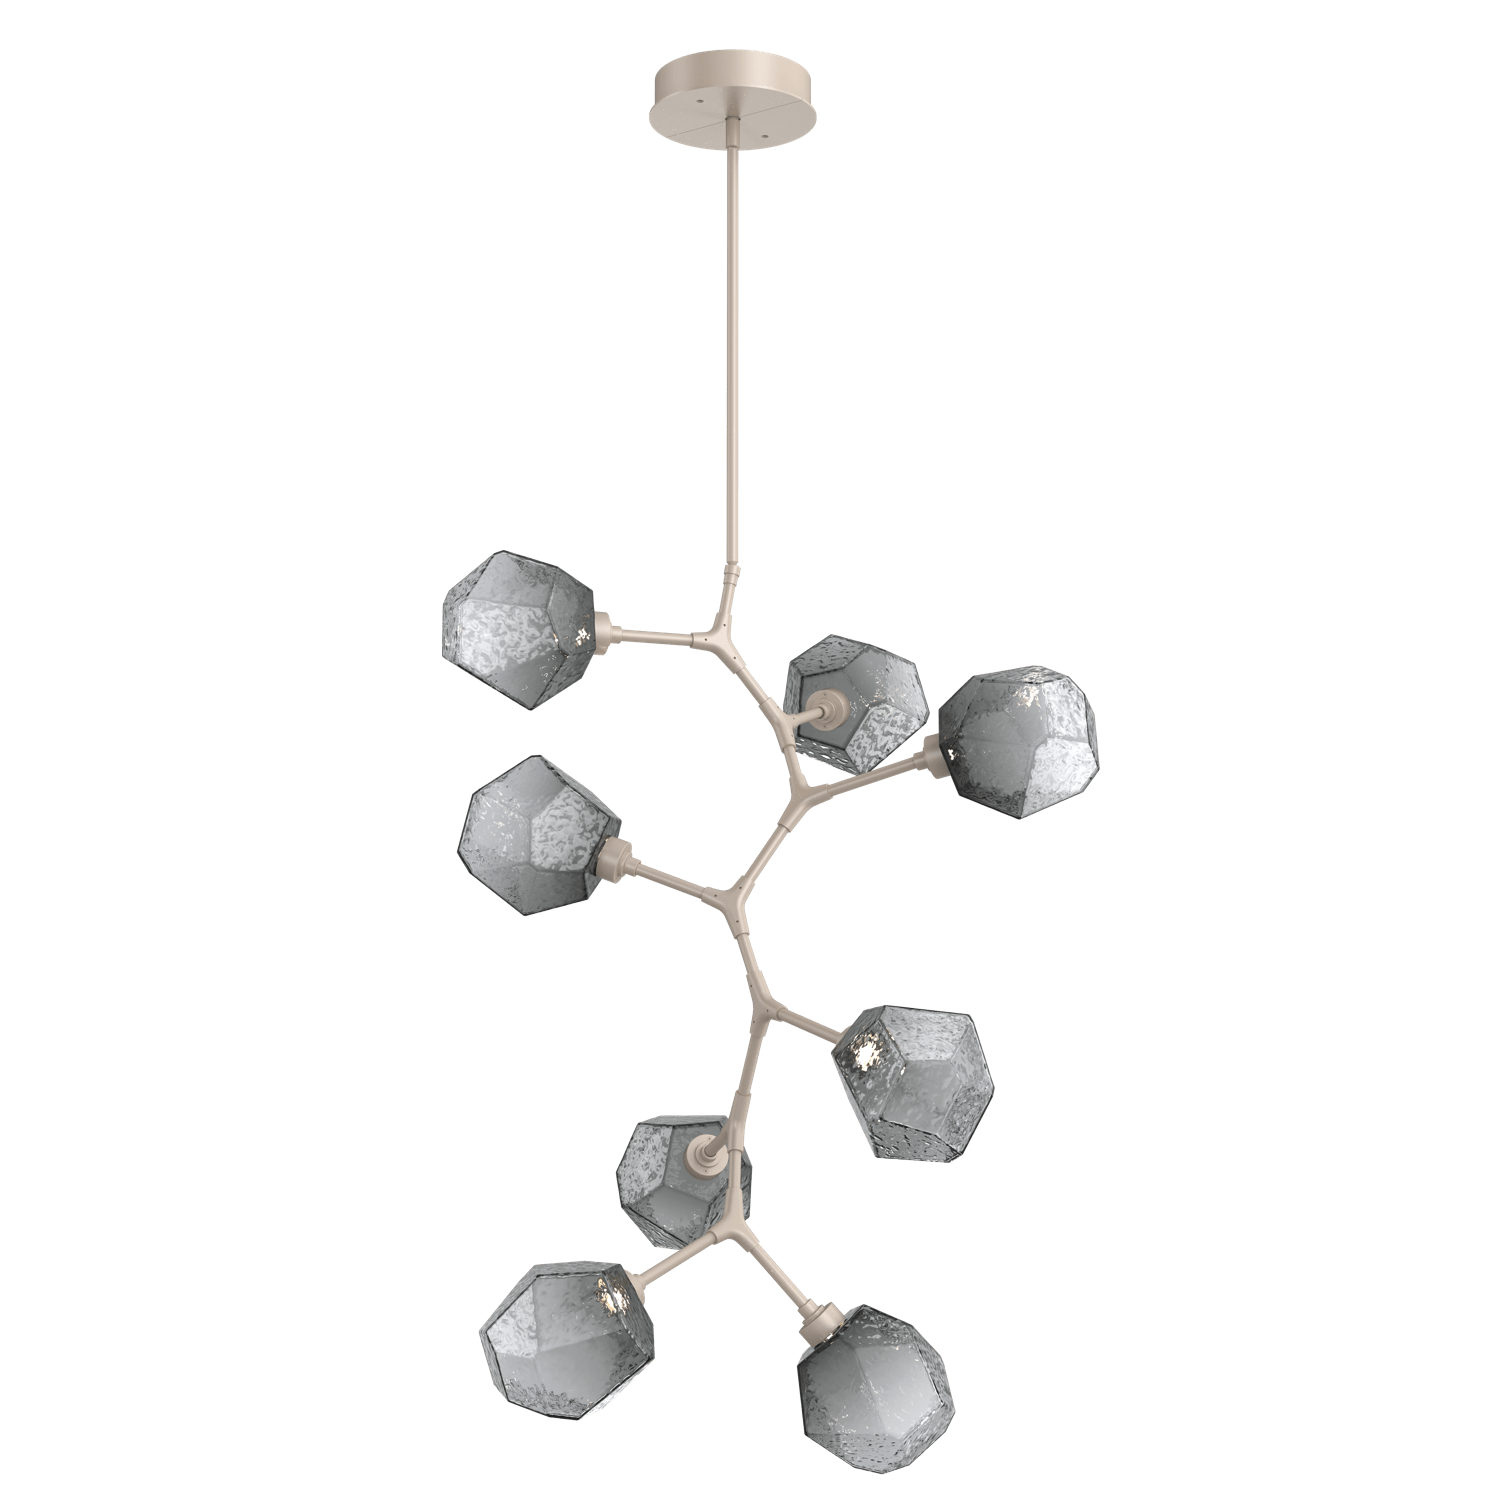 CHB0039-VB-BS-S-Hammerton-Studio-Gem-8-light-modern-vine-chandelier-with-metallic-beige-silver-finish-and-smoke-blown-glass-shades-and-LED-lamping